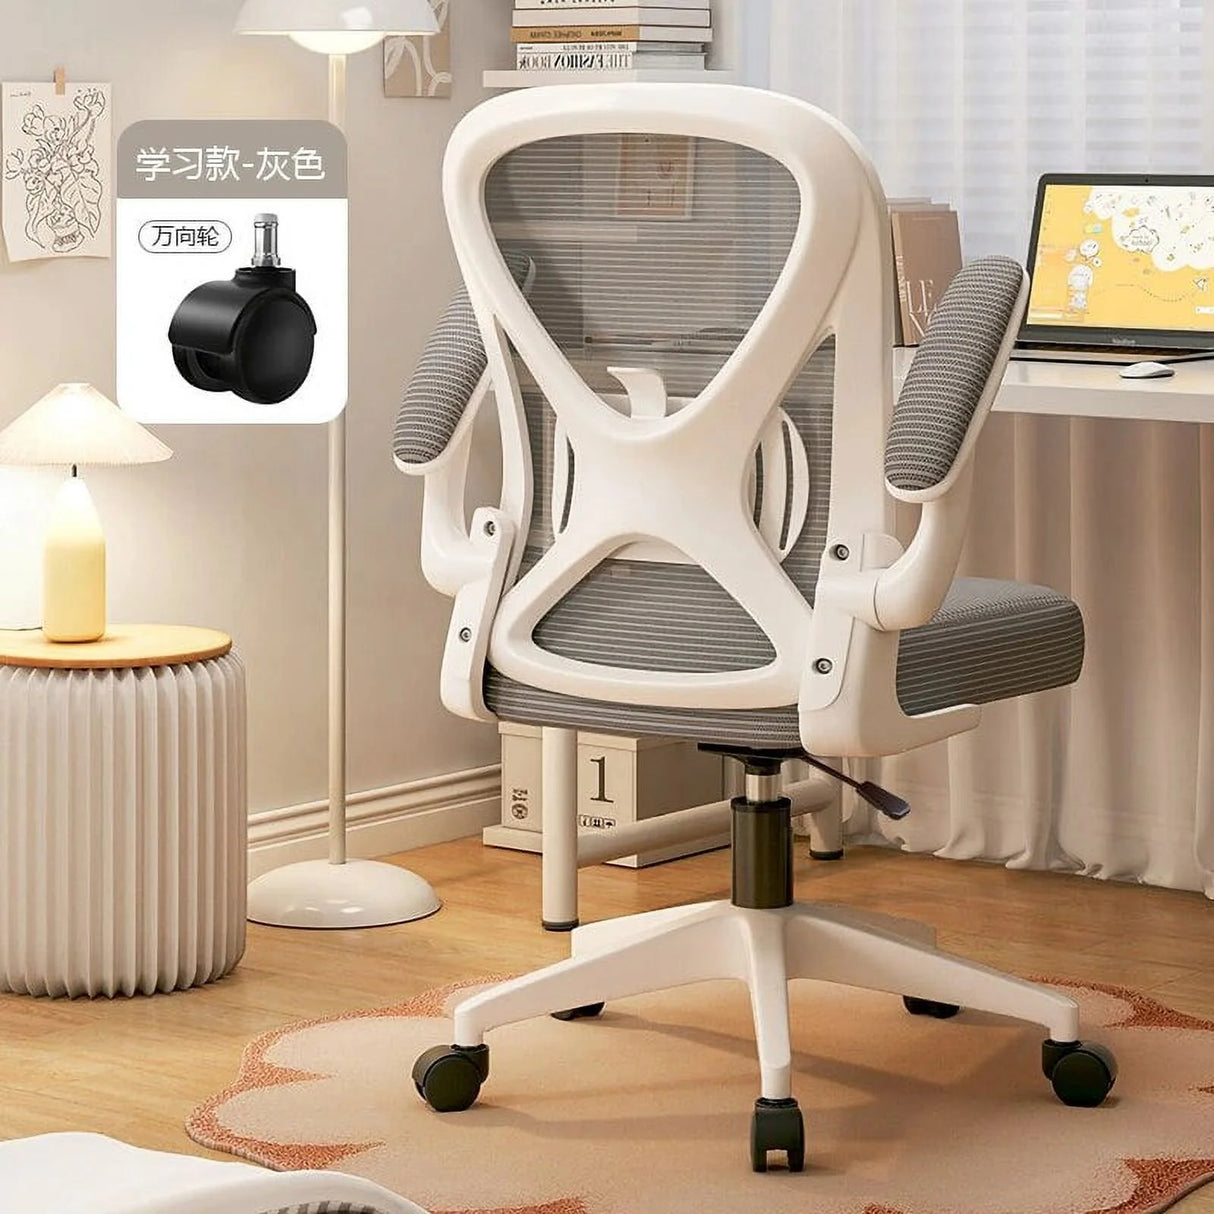 Modern Rolling Office Chair Recliner Stools Swivel Comfortable Office Chair Living Room Sillas De Oficina Bedroom Furniture